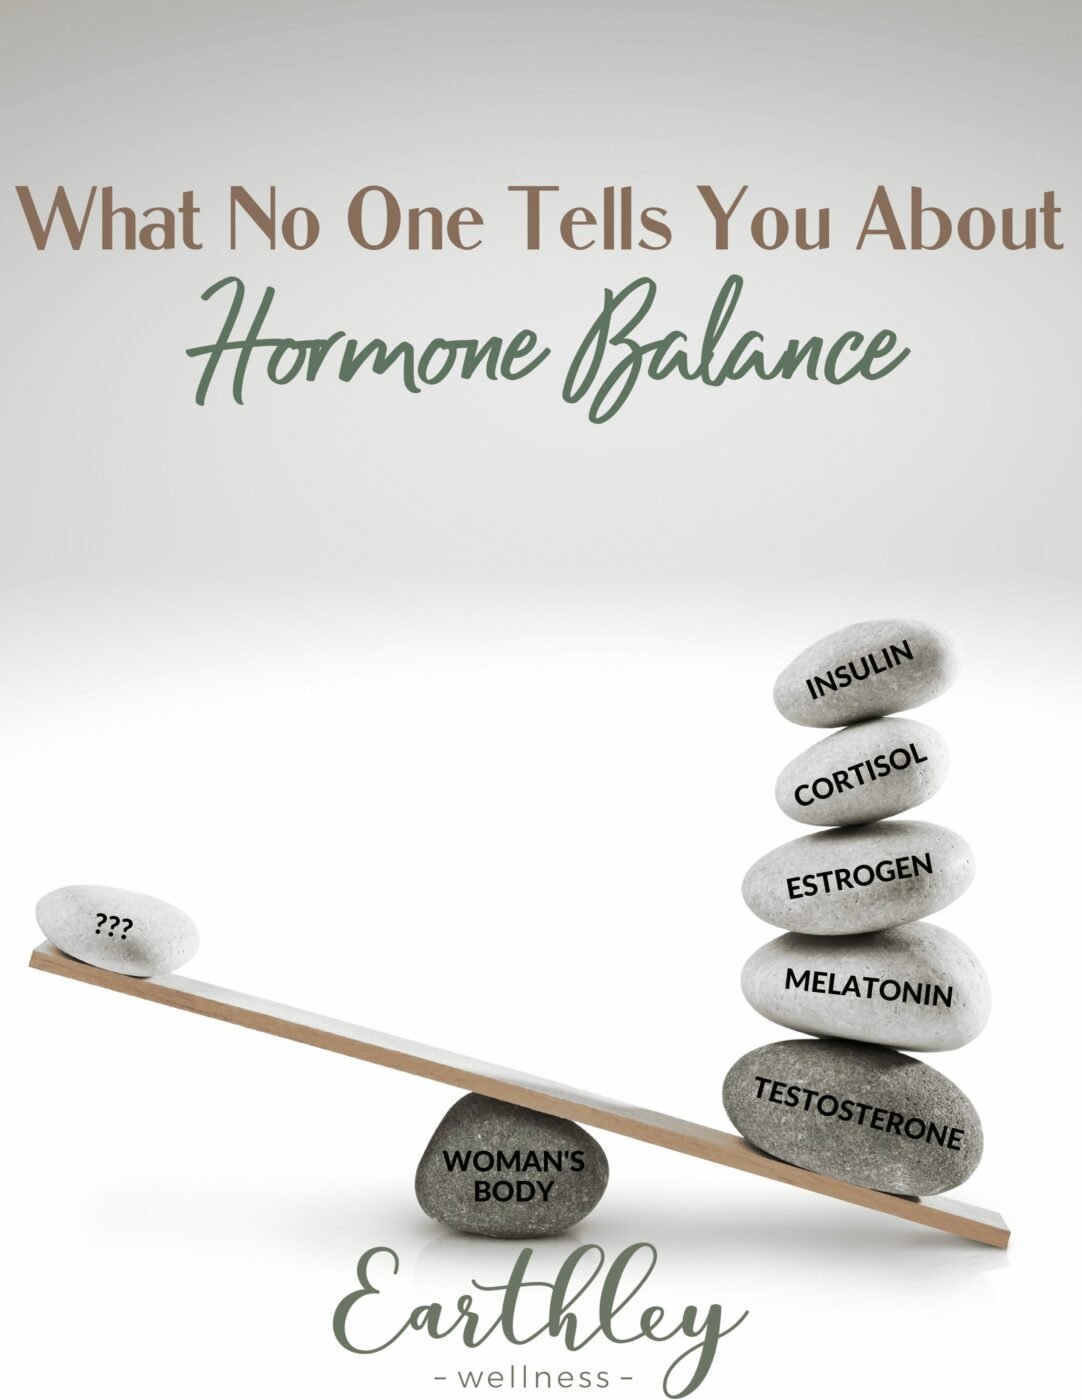 Foods That Balance Hormones: 11 Things All Women Need